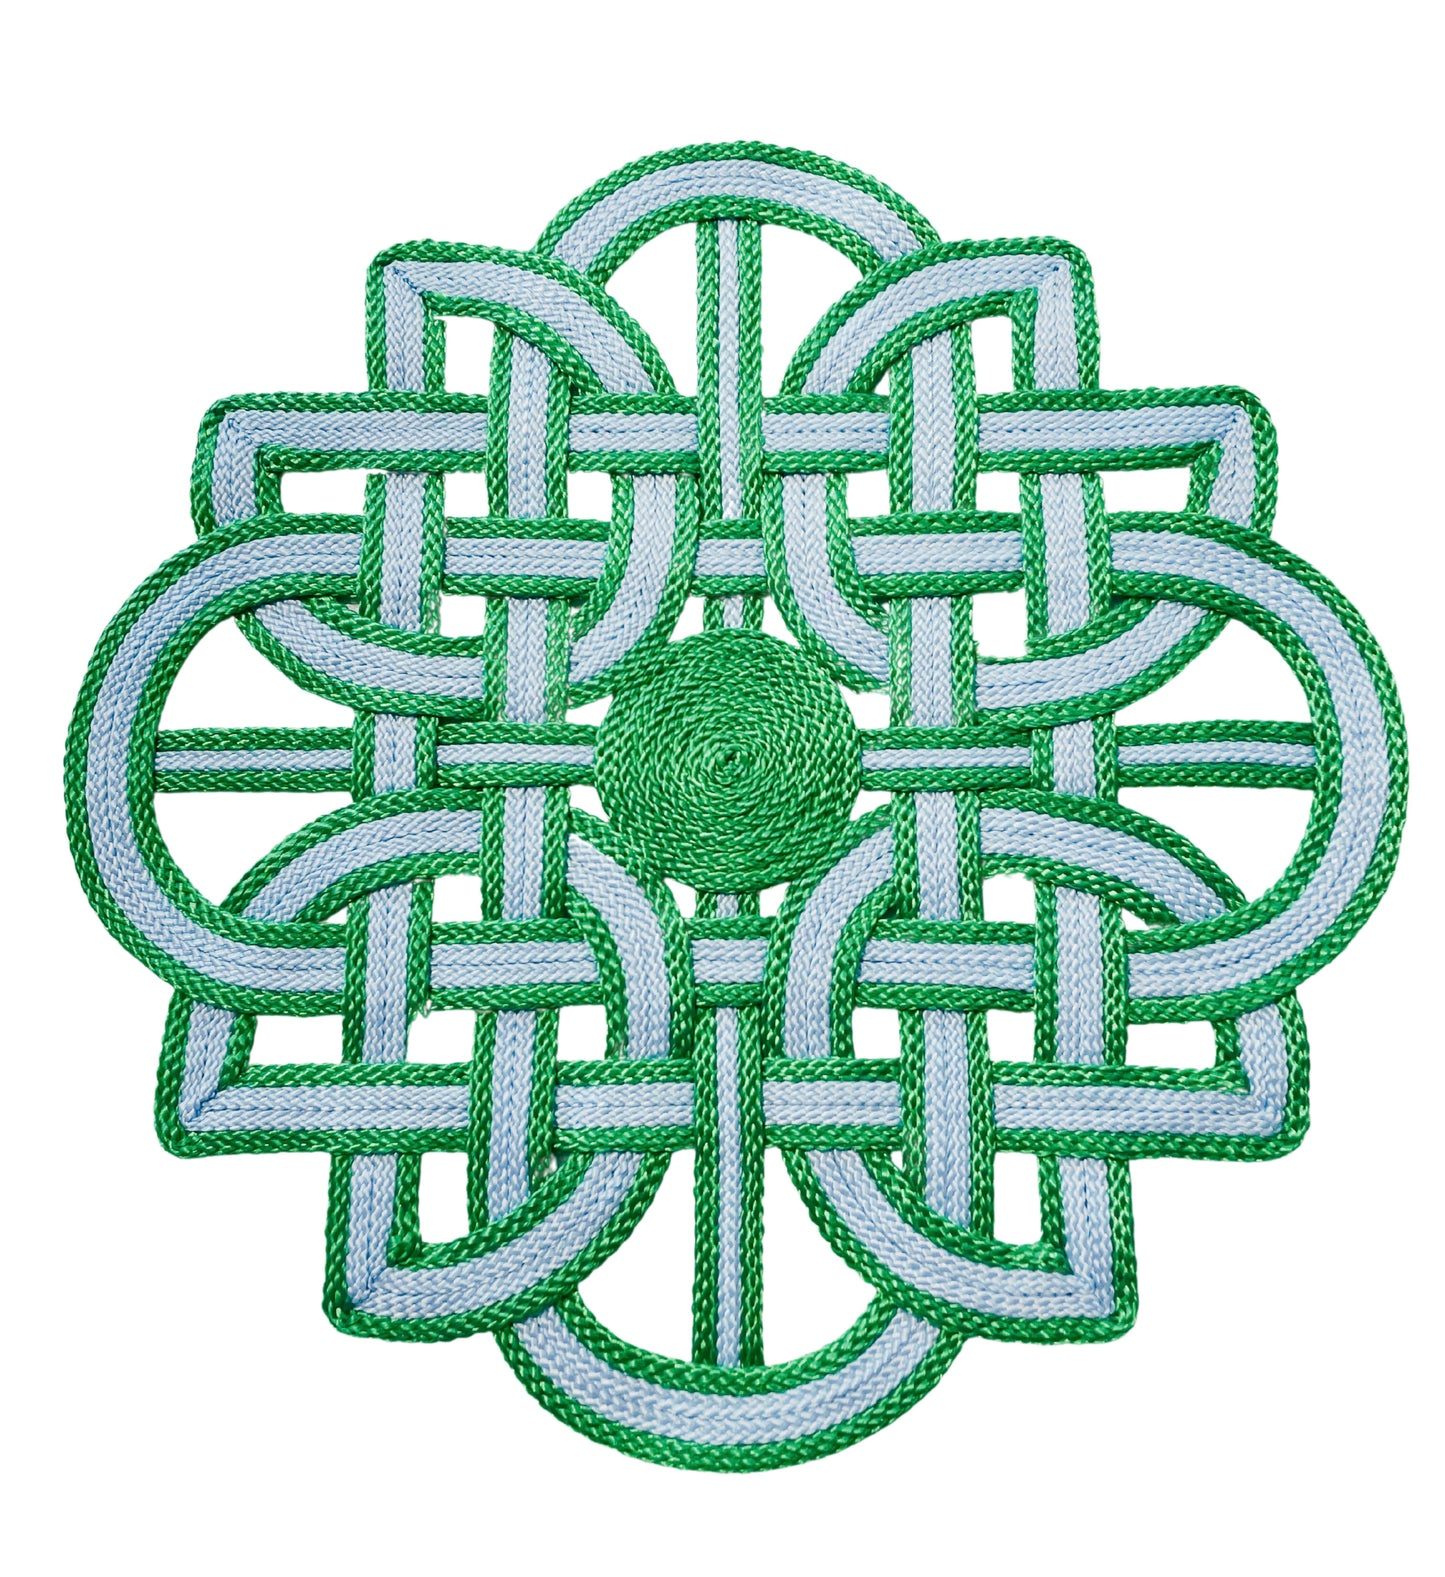 Lotus Placemat - Green and Blue